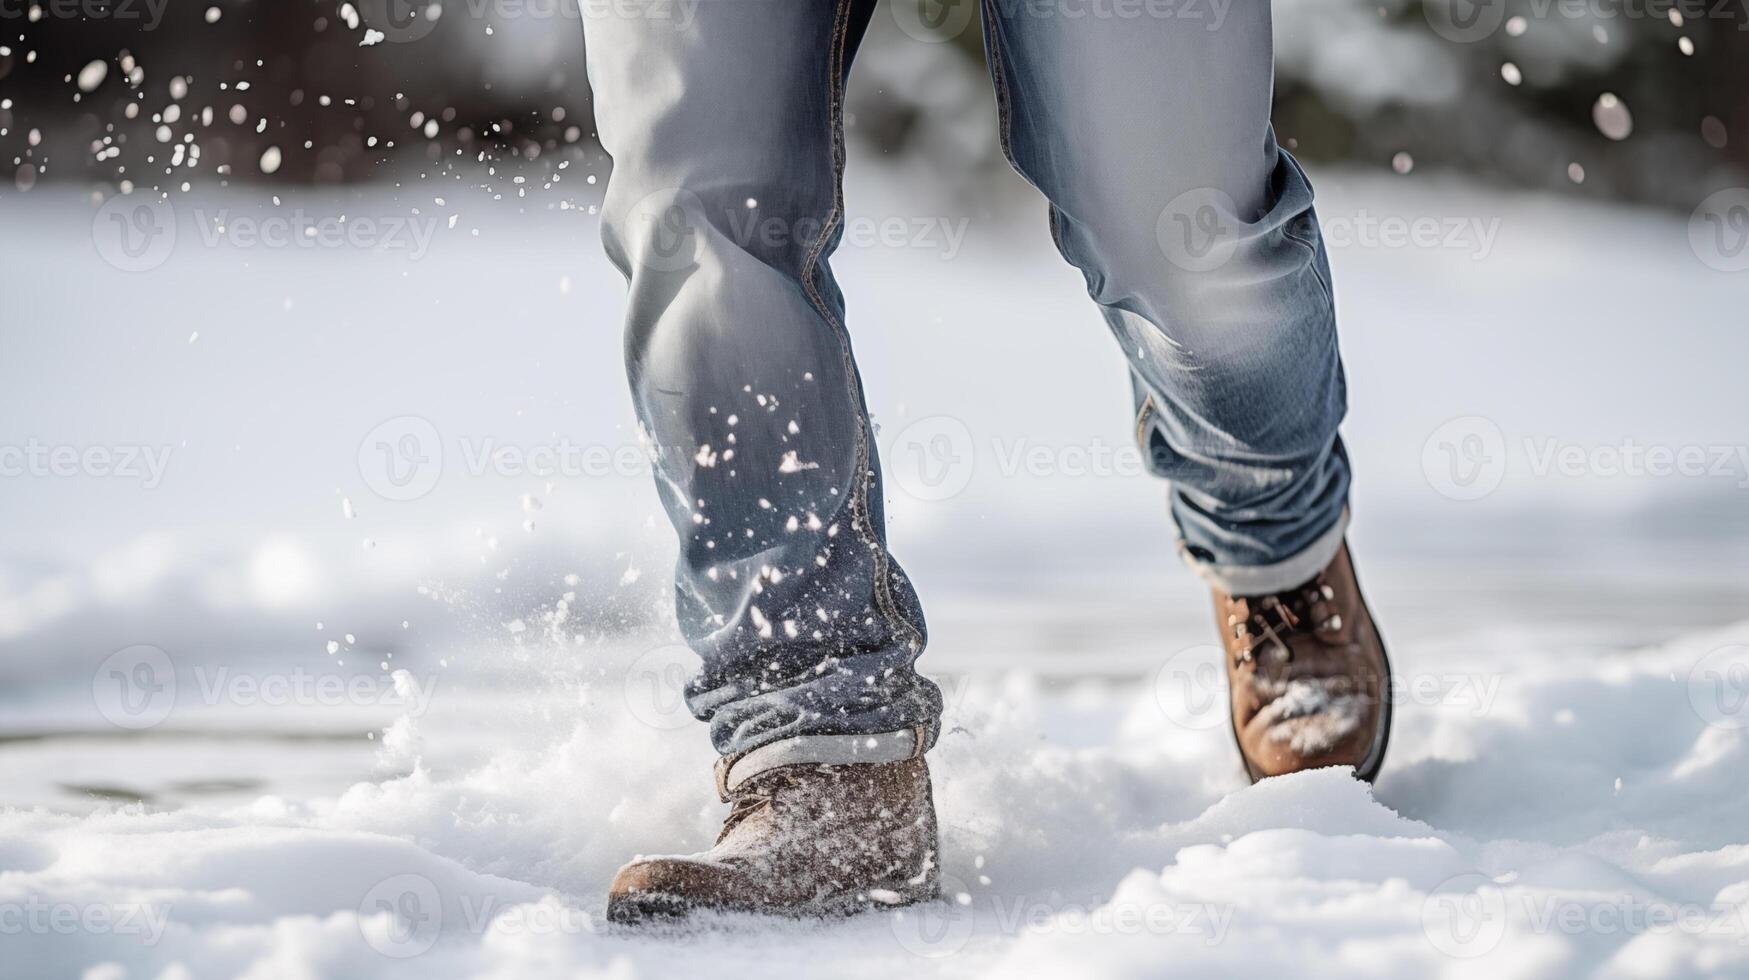 AI generated Person walking through snow wearing boots and jeans. Concept winter, cold, outdoors, nature. Posters, Magazines, Advertising, Travel, Promotion. photo